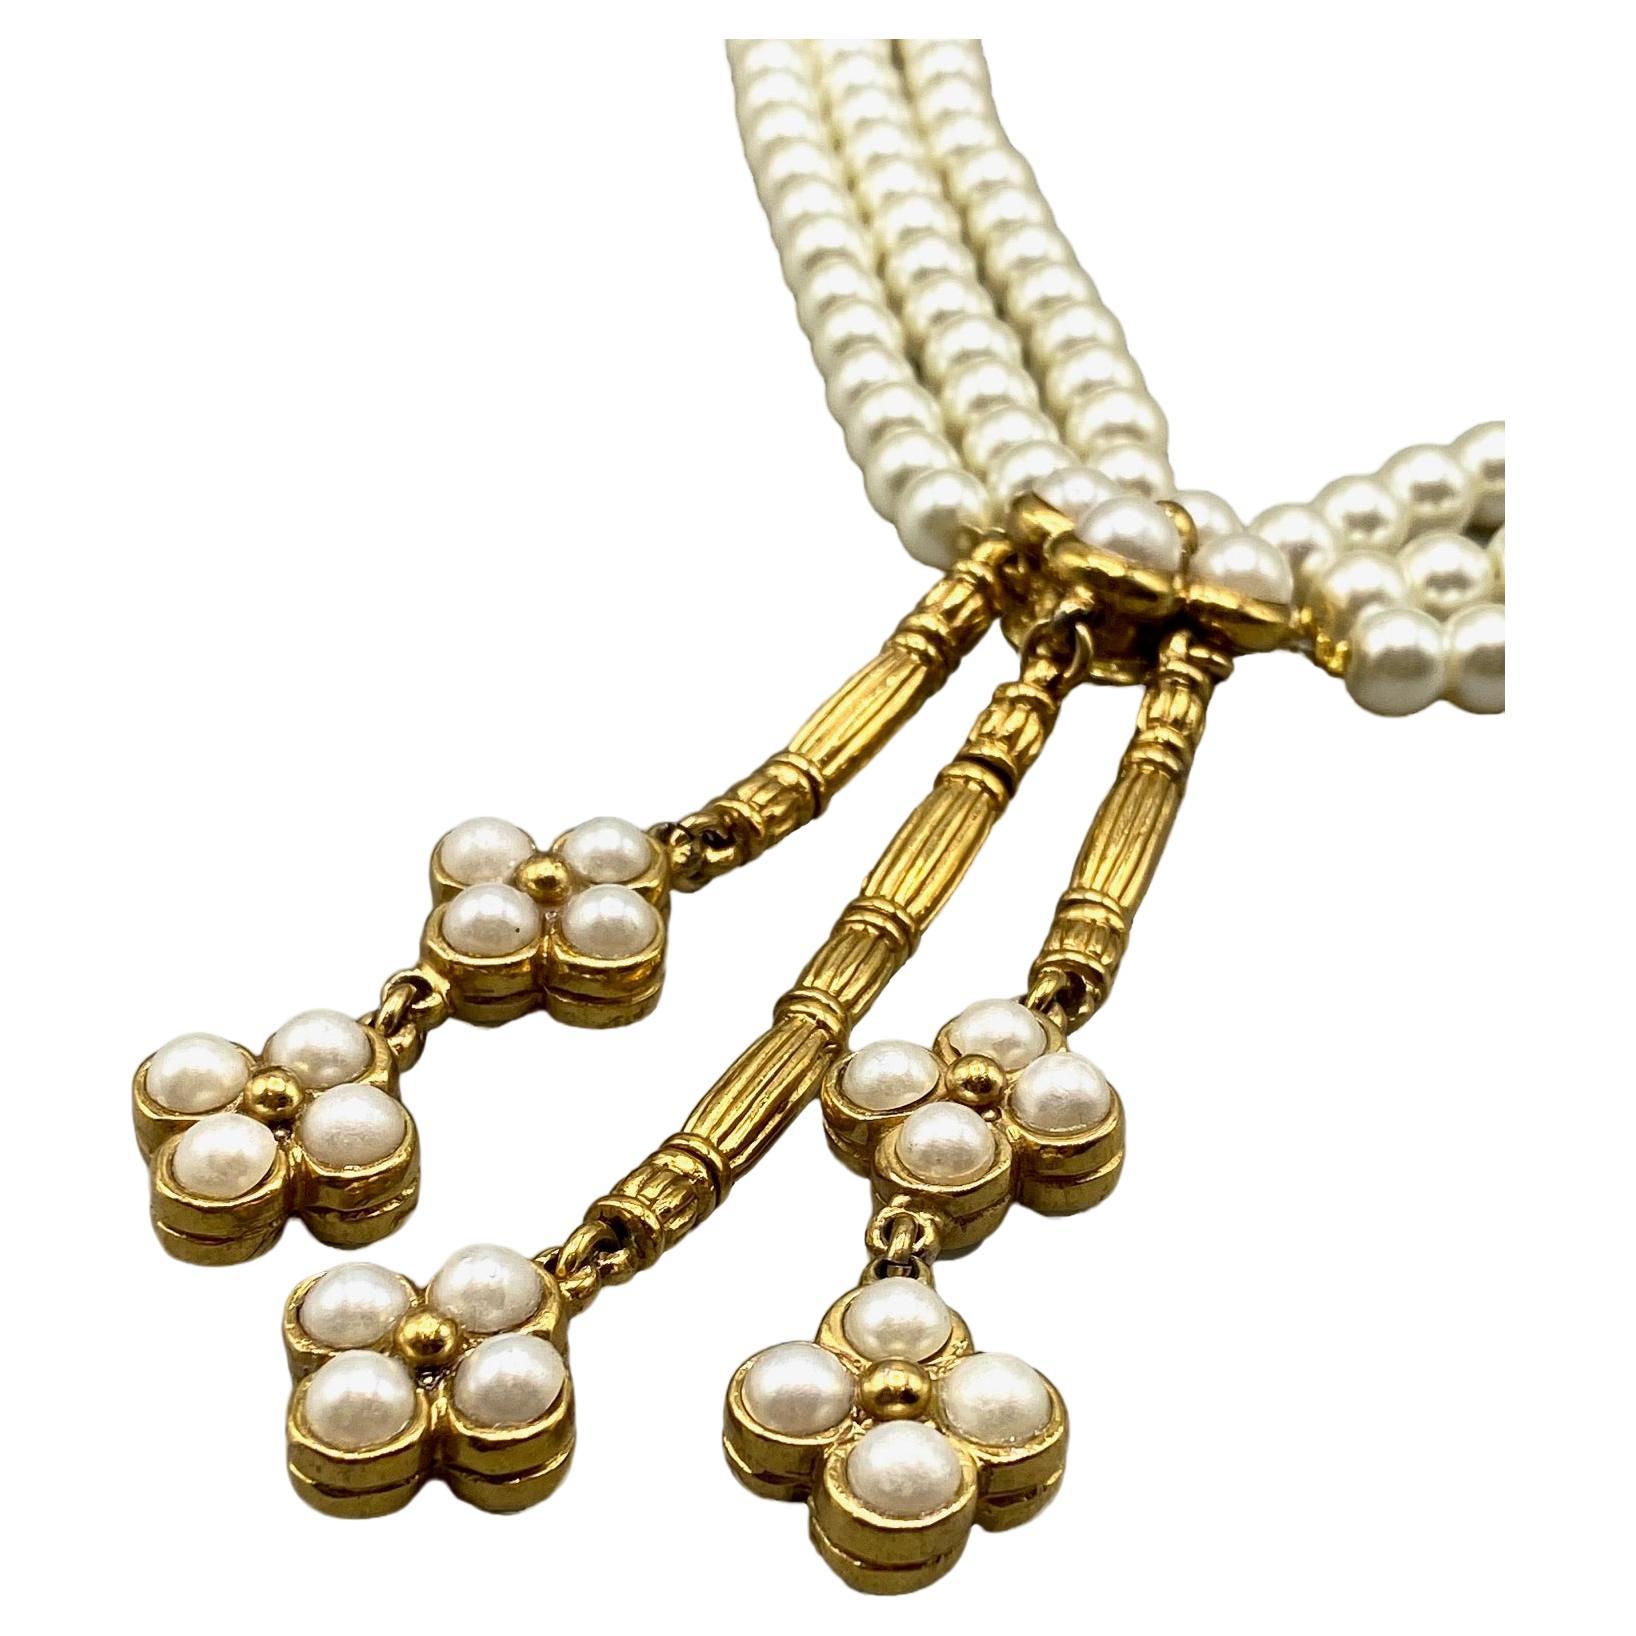 Presented is a 1980s three strand faux pearl necklace with gold tone and pearl pendants from the Christian Dior Boutique. The three strands are comprised of 8mm size glass interior faux pearls measure 1 inch wide lying flat. The stands meet in the